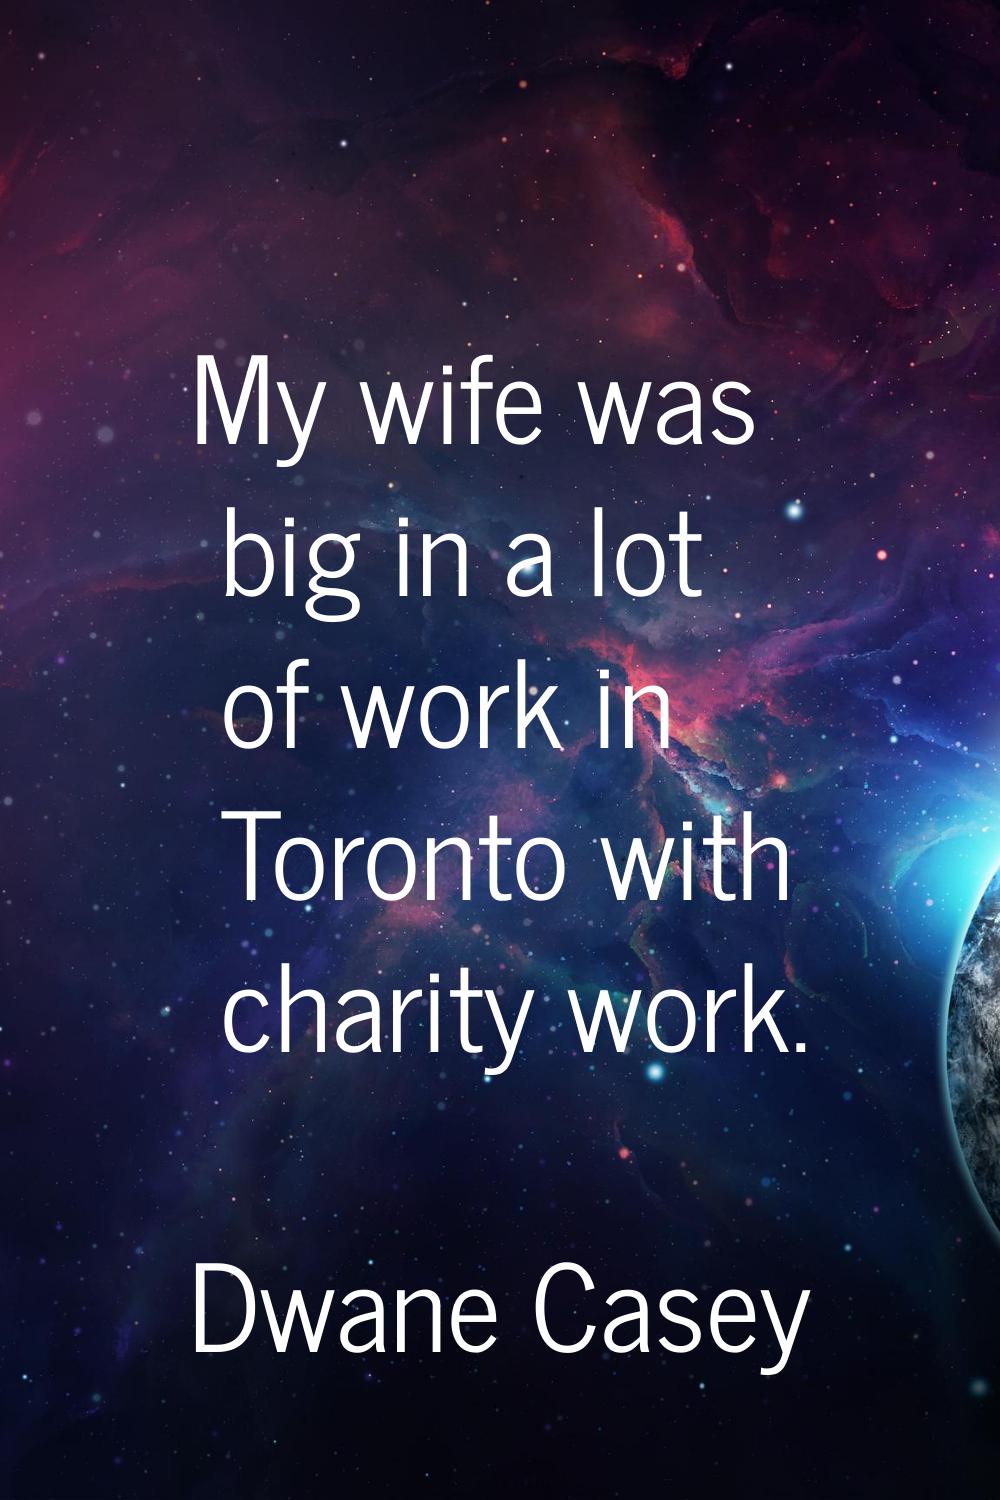 My wife was big in a lot of work in Toronto with charity work.